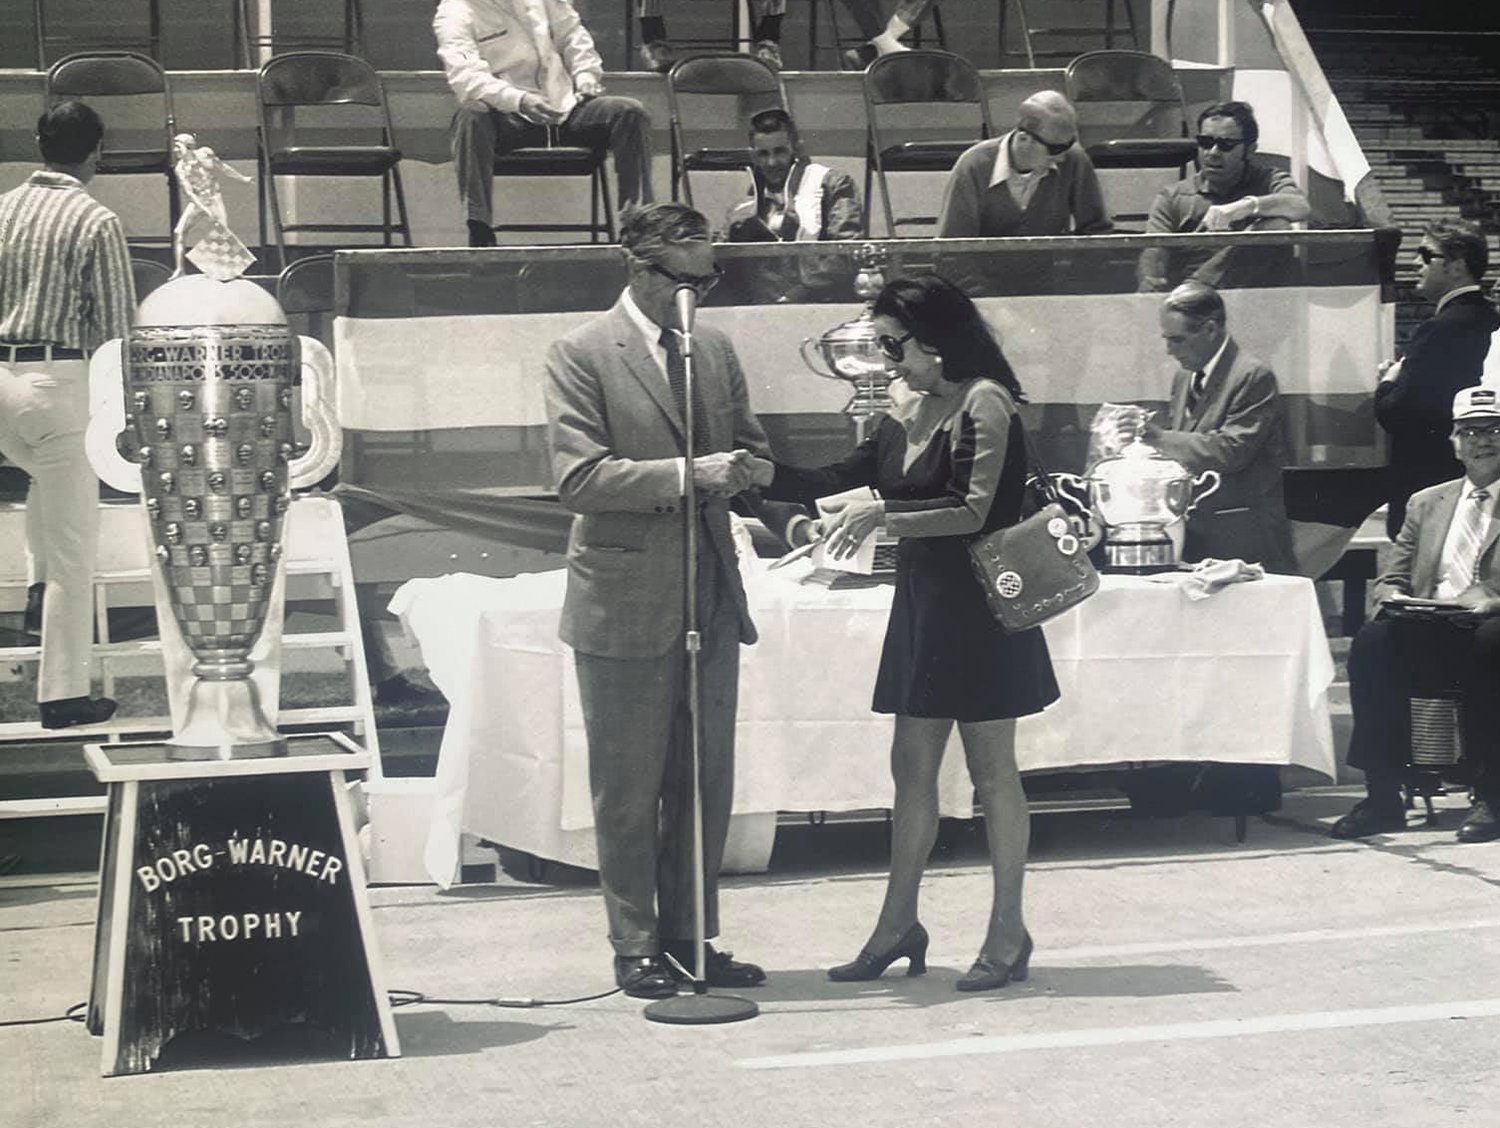 Bettie Cadou is given her silver badge by Tony Hulman at the Indianapolis Motor Speedway in 1971. Cadou was the first woman granted access to the pits and garage area at MS.